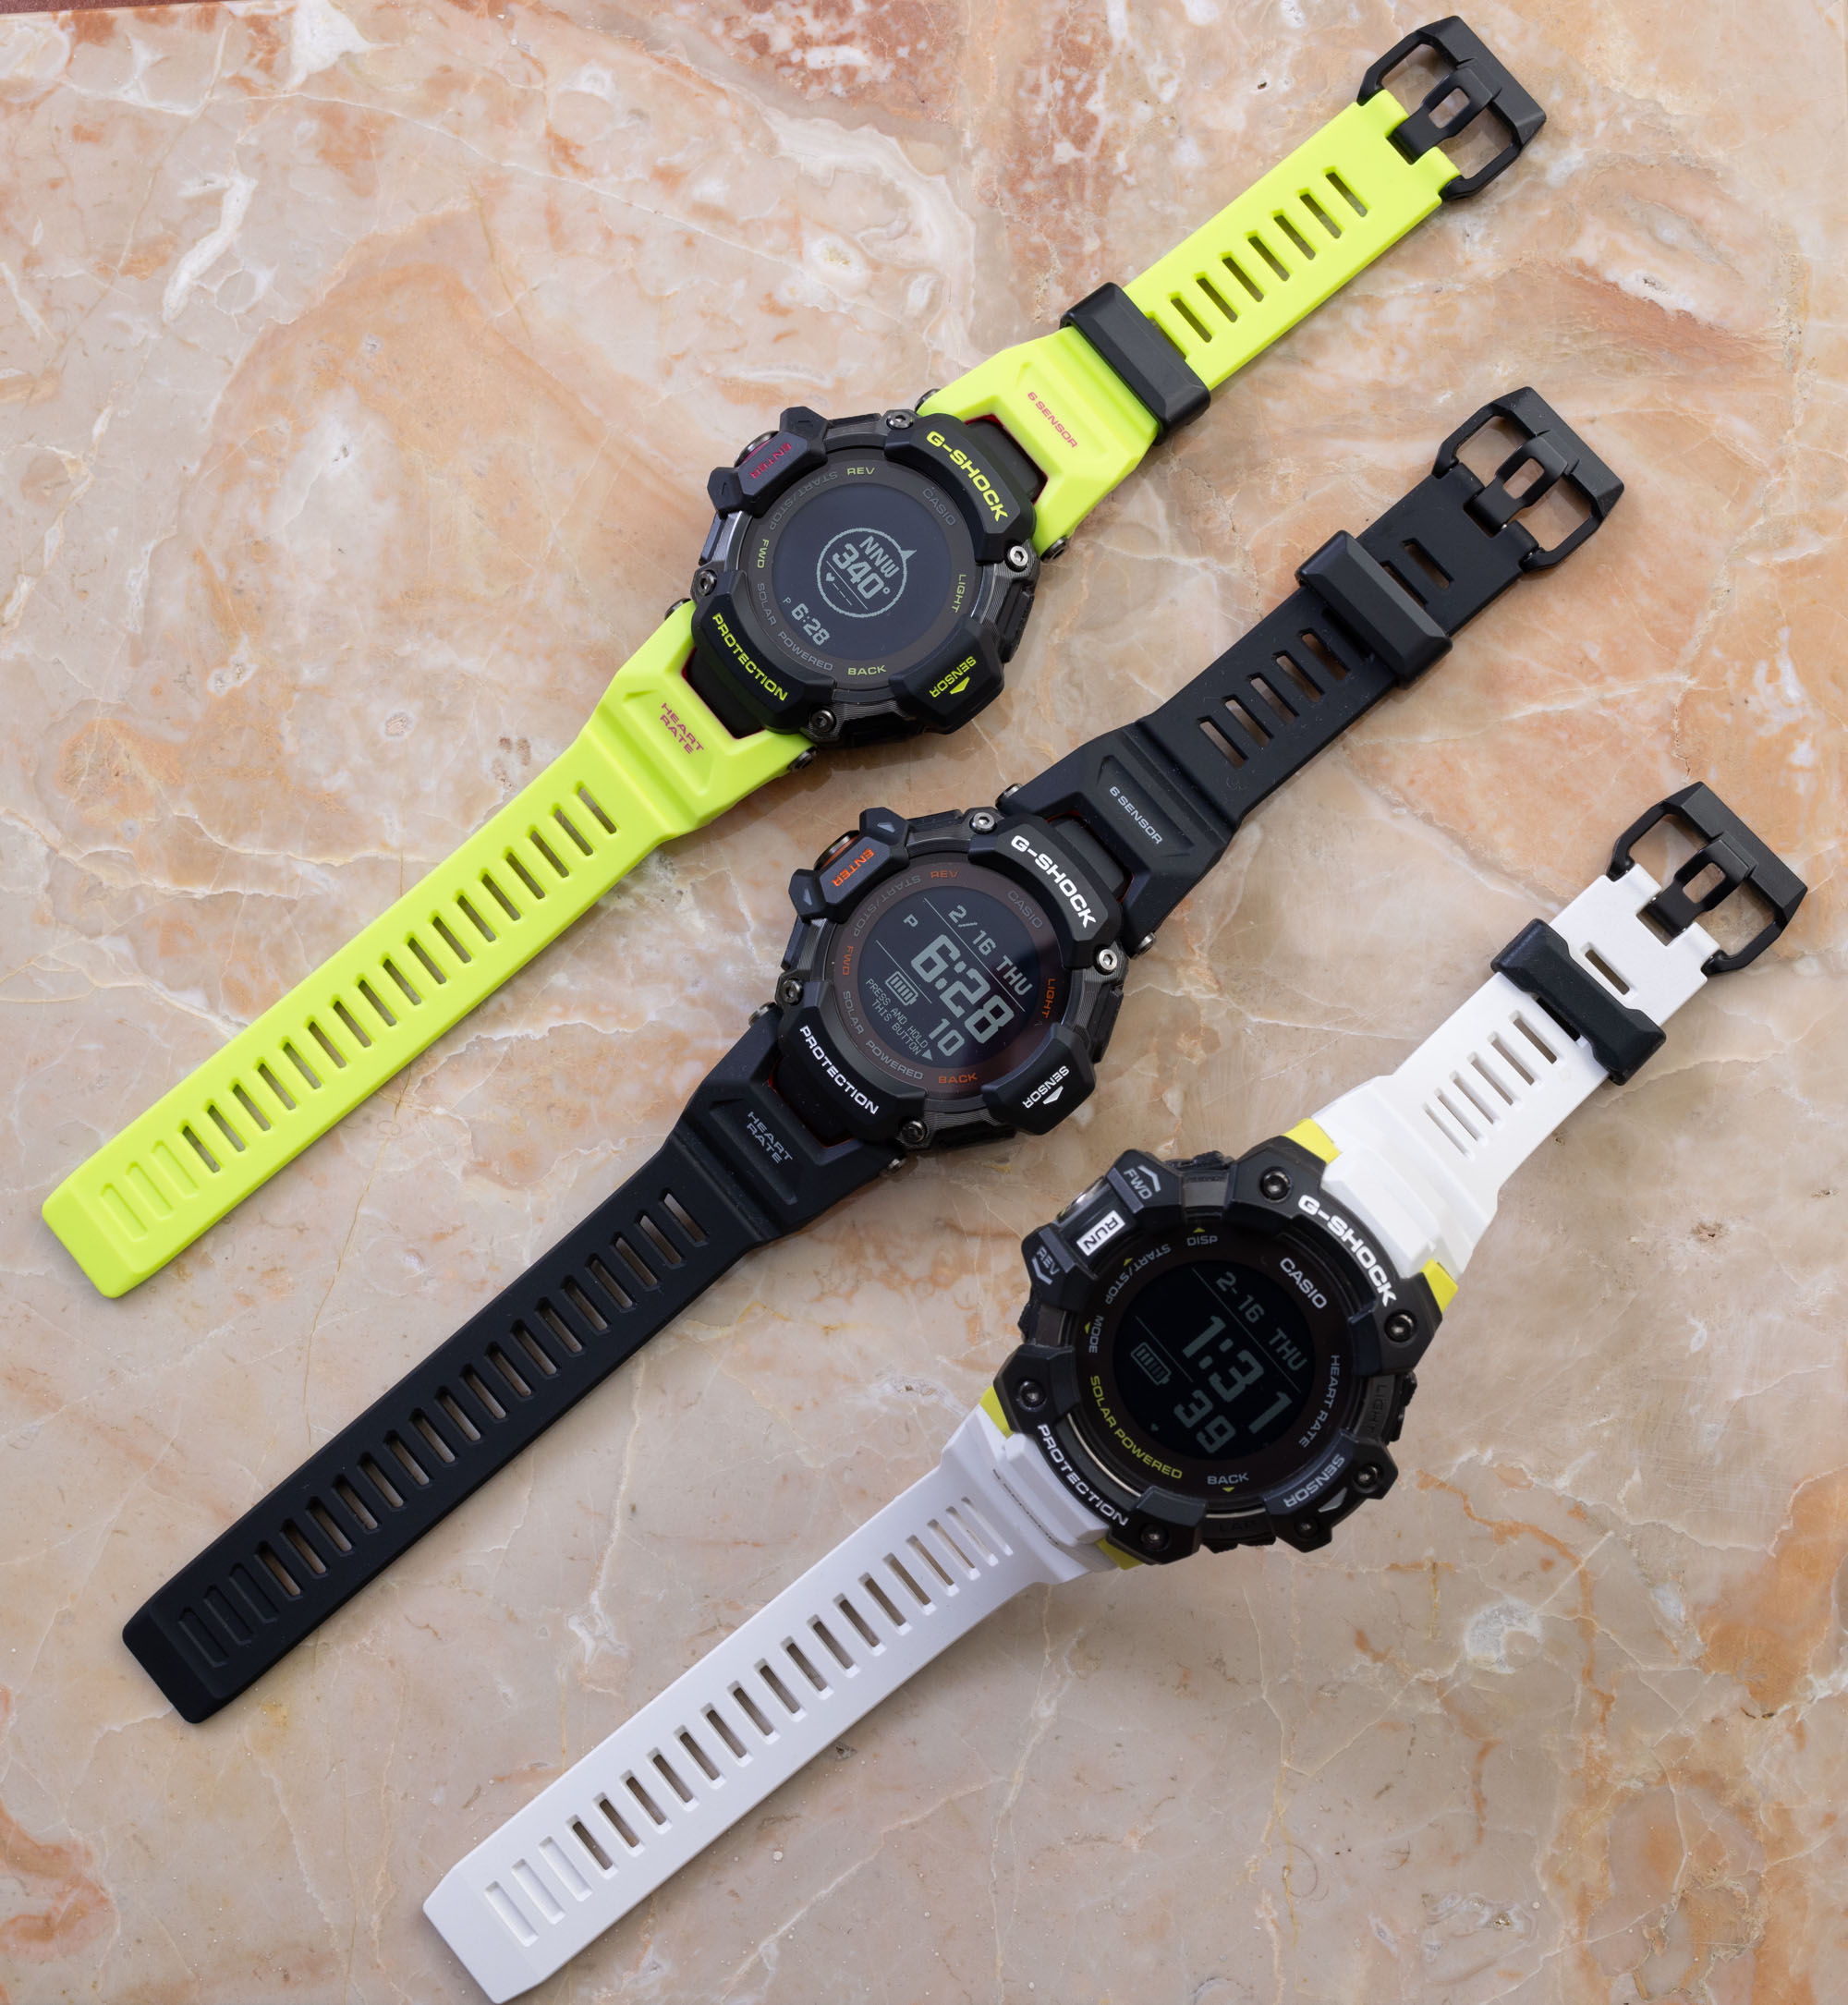 Watch Review: Casio G-Shock Move GBD-H2000 Smart Activity Tracker